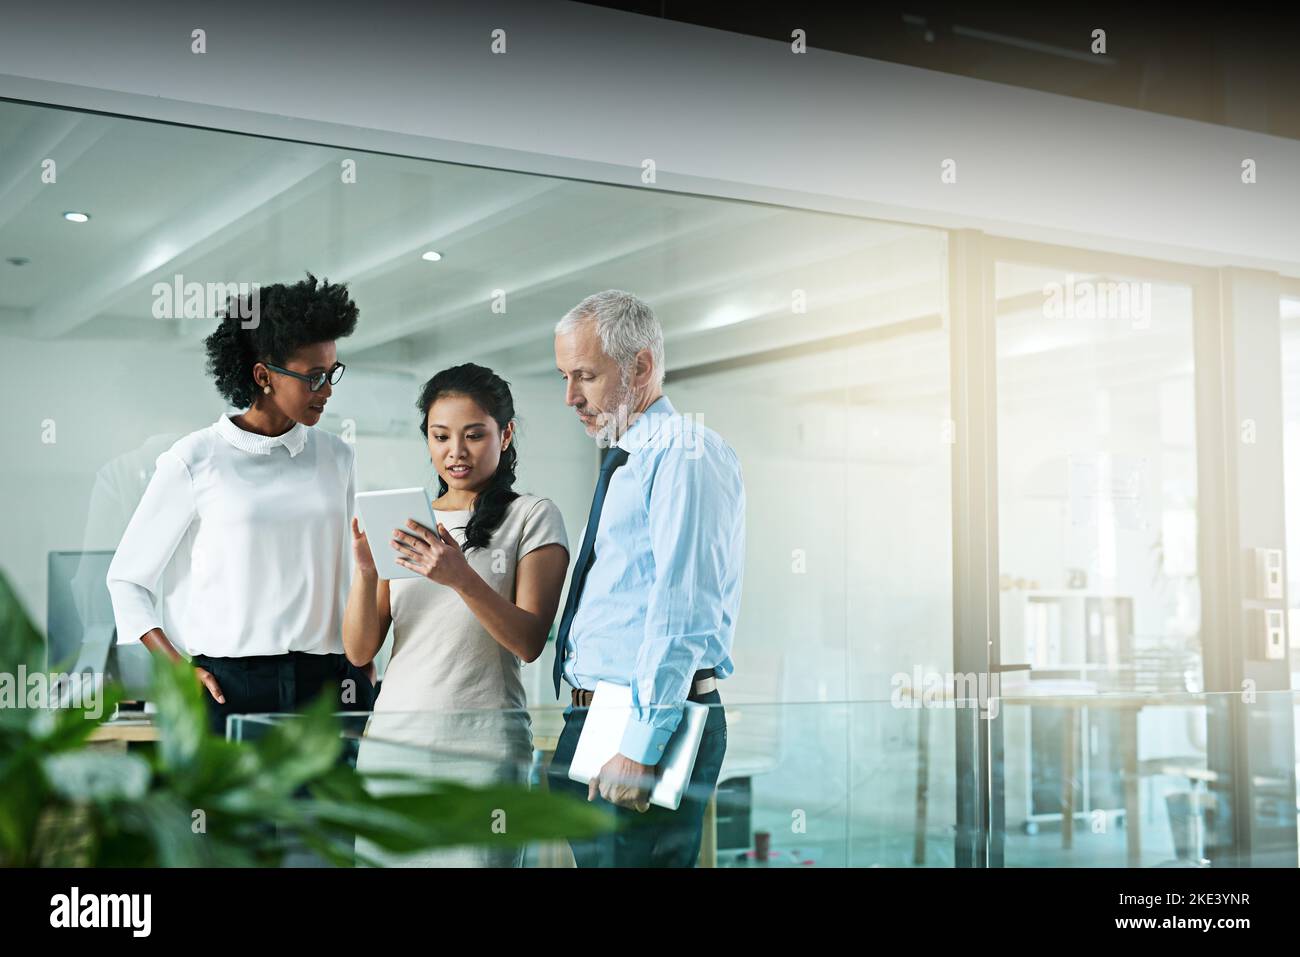 One persons strengths will cover anothers weakness, thats teamwork. a business team using a digital tablet while having an informal meeting. Stock Photo